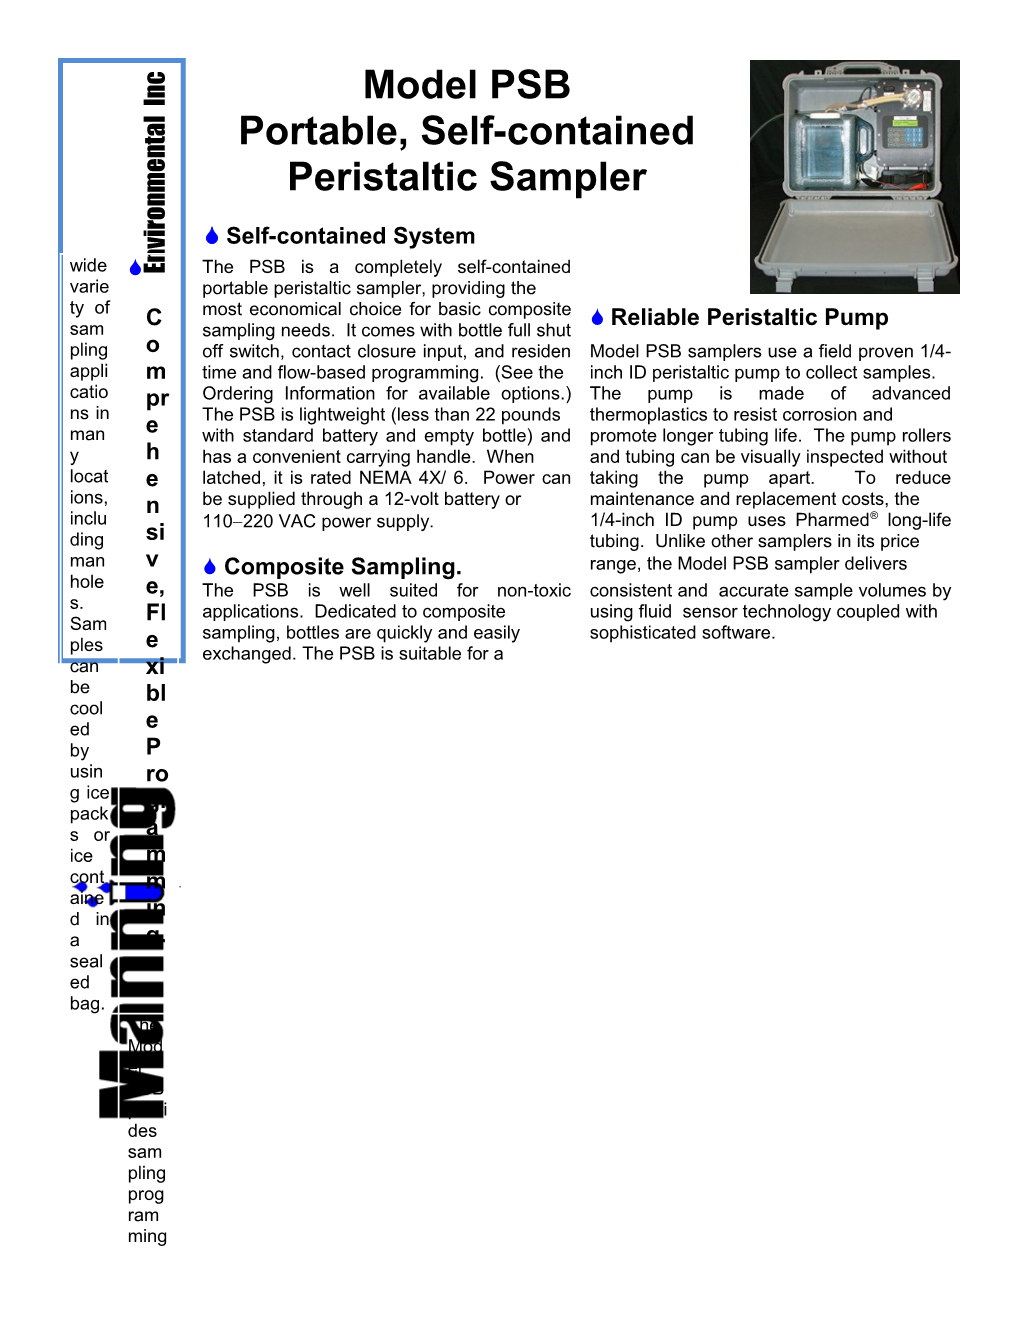 Portable, Self-Contained Peristaltic Sampler